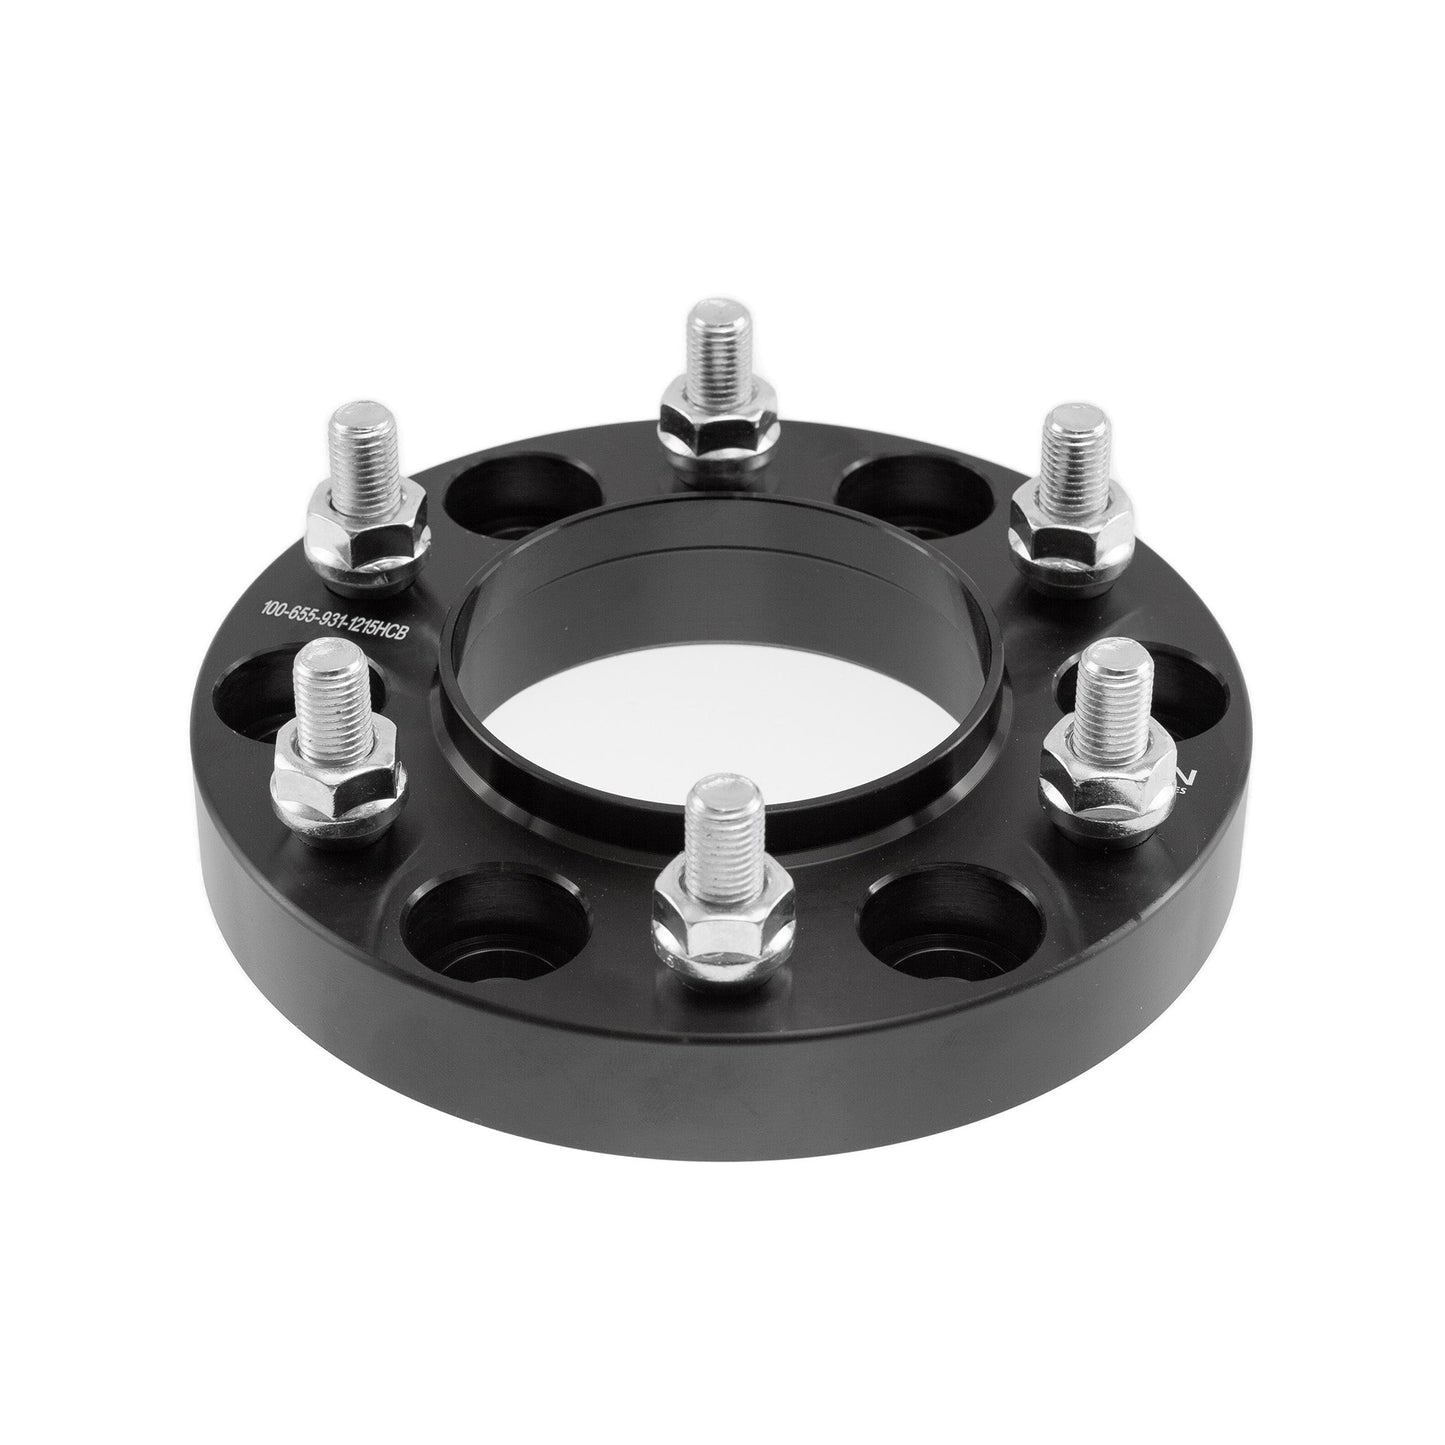 1" (25mm) Titan Wheel Spacers for Ford Bronco 2021-2022 Ranger 2019+ | 6x5.5 (6x139.7) | 93.1 Hubcentric | 12x1.5 Studs | Titan Wheel Accessories